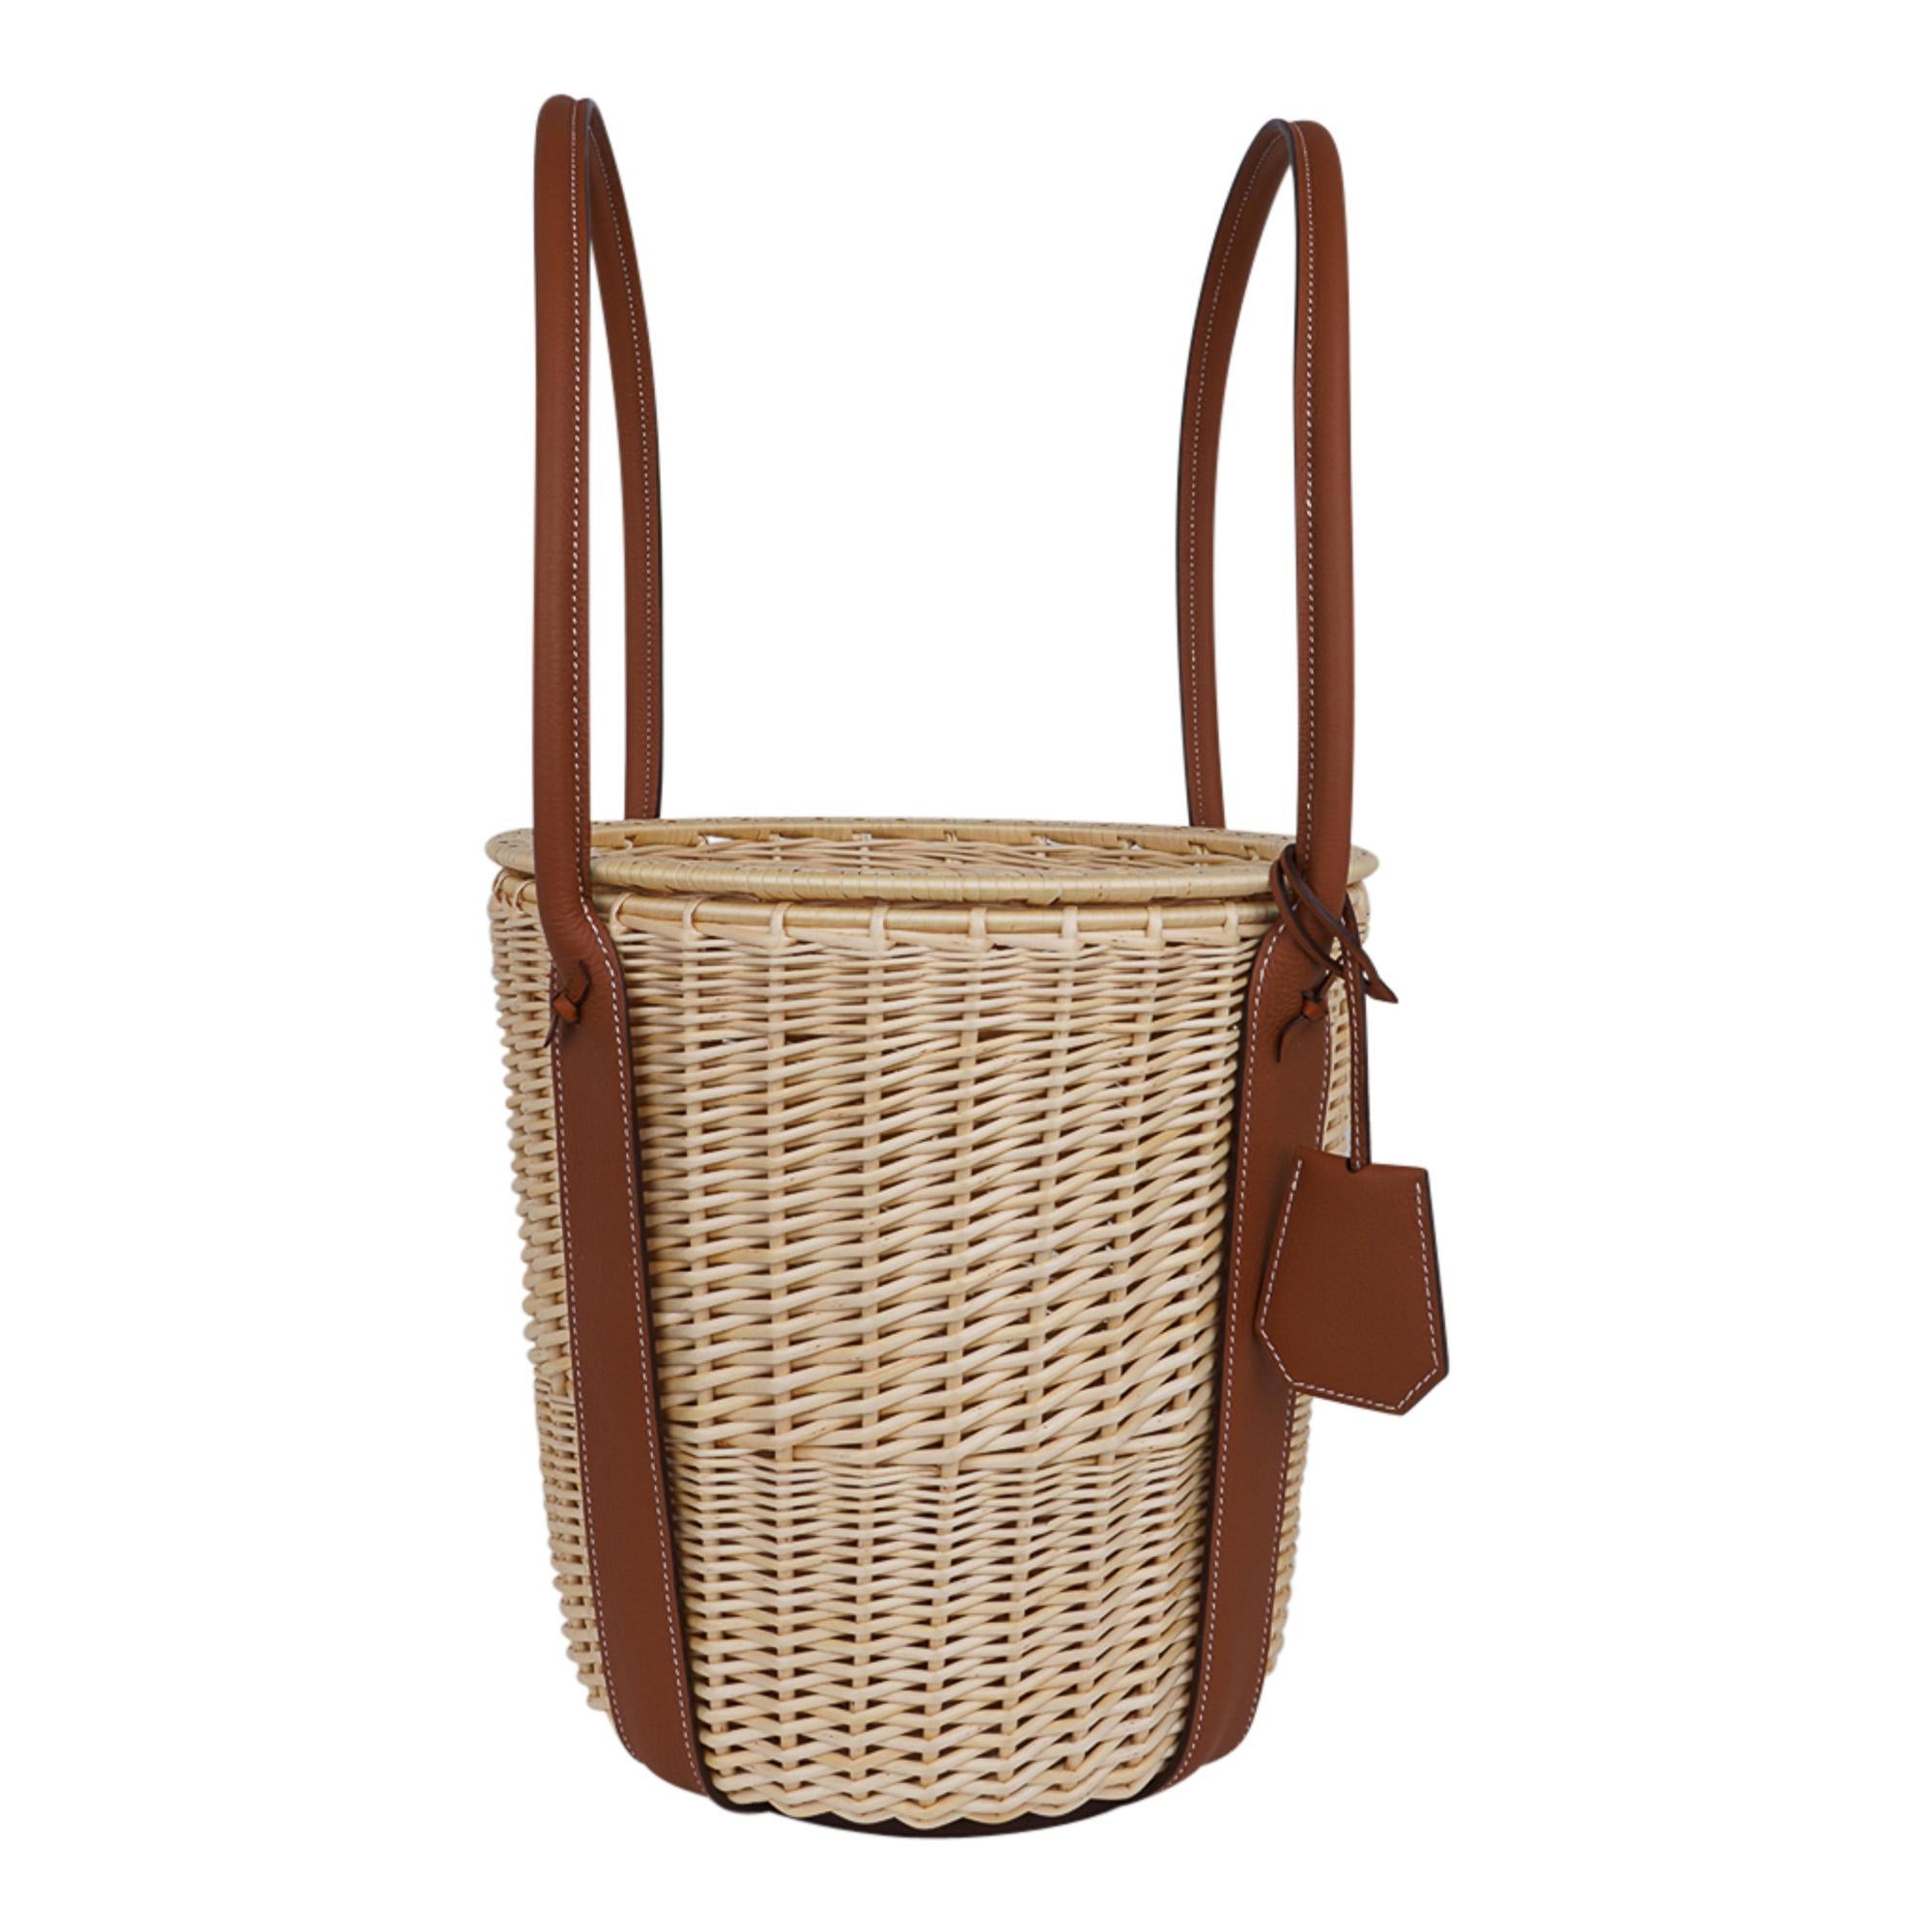 Mightychic offers a guaranteed authentic limited edition Hermes Park Picnic Basket for a most delightful outing with a dash of luxury.
Hand braided wicker ( Osier ) accentuated with smooth Taurillon leather.
Open to reveal a set of 8 fresh, pretty